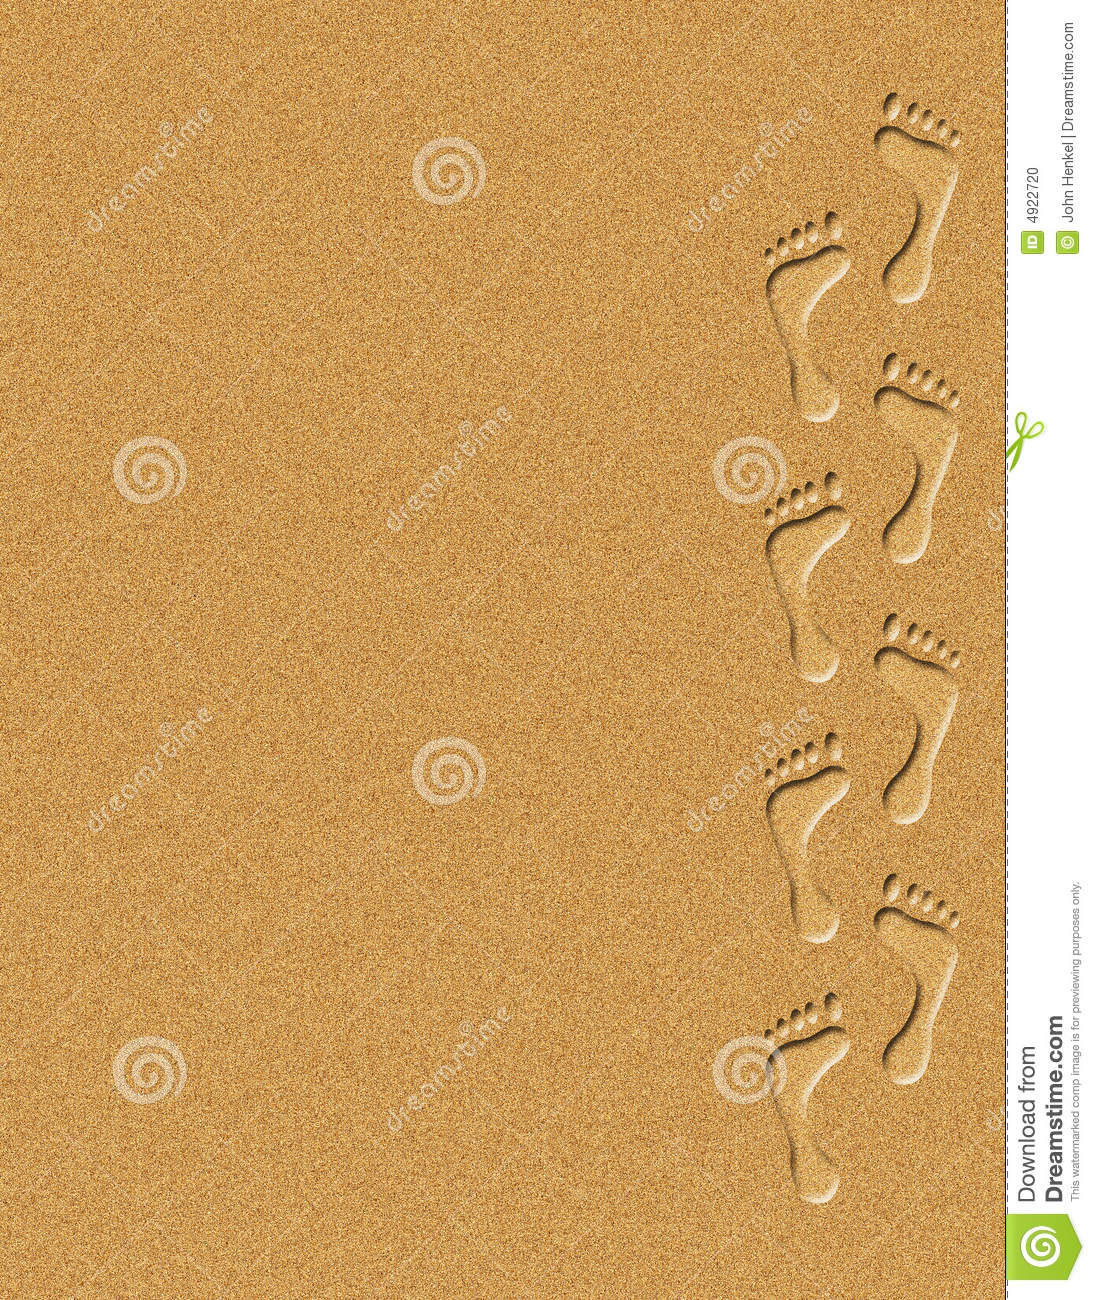 Footprints In The Sand Clipart Footprints In The Sand